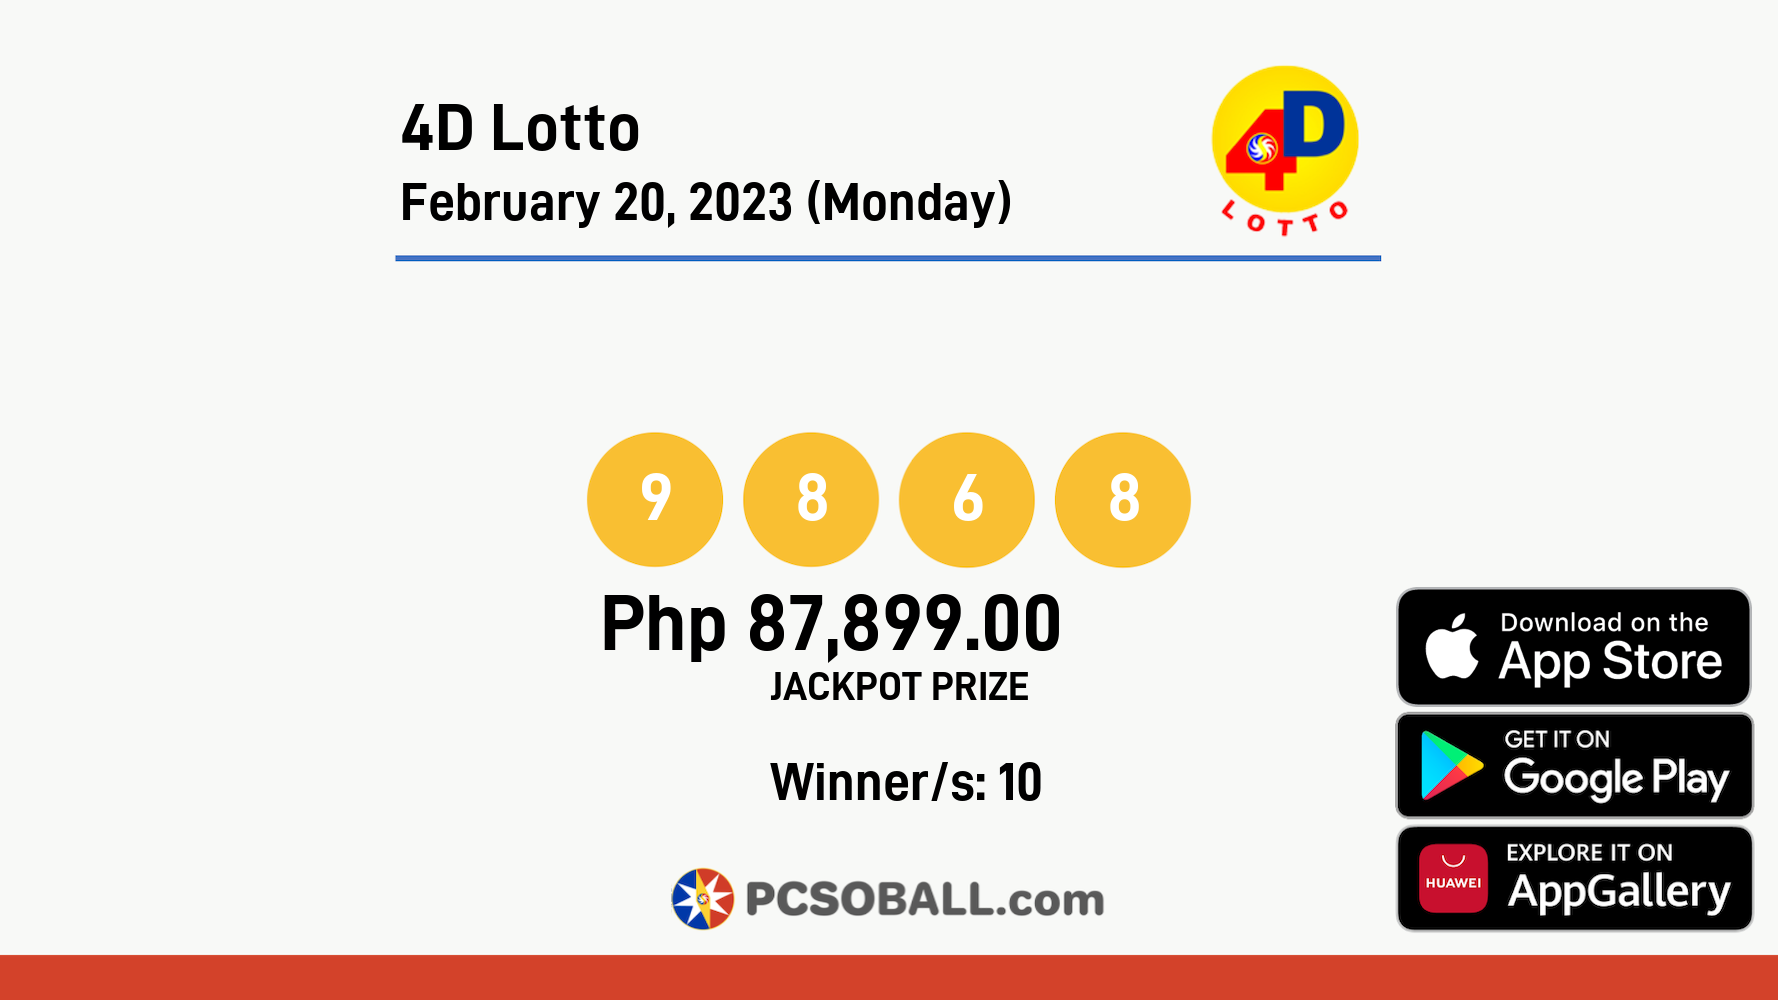 4D Lotto February 20, 2023 (Monday) Result